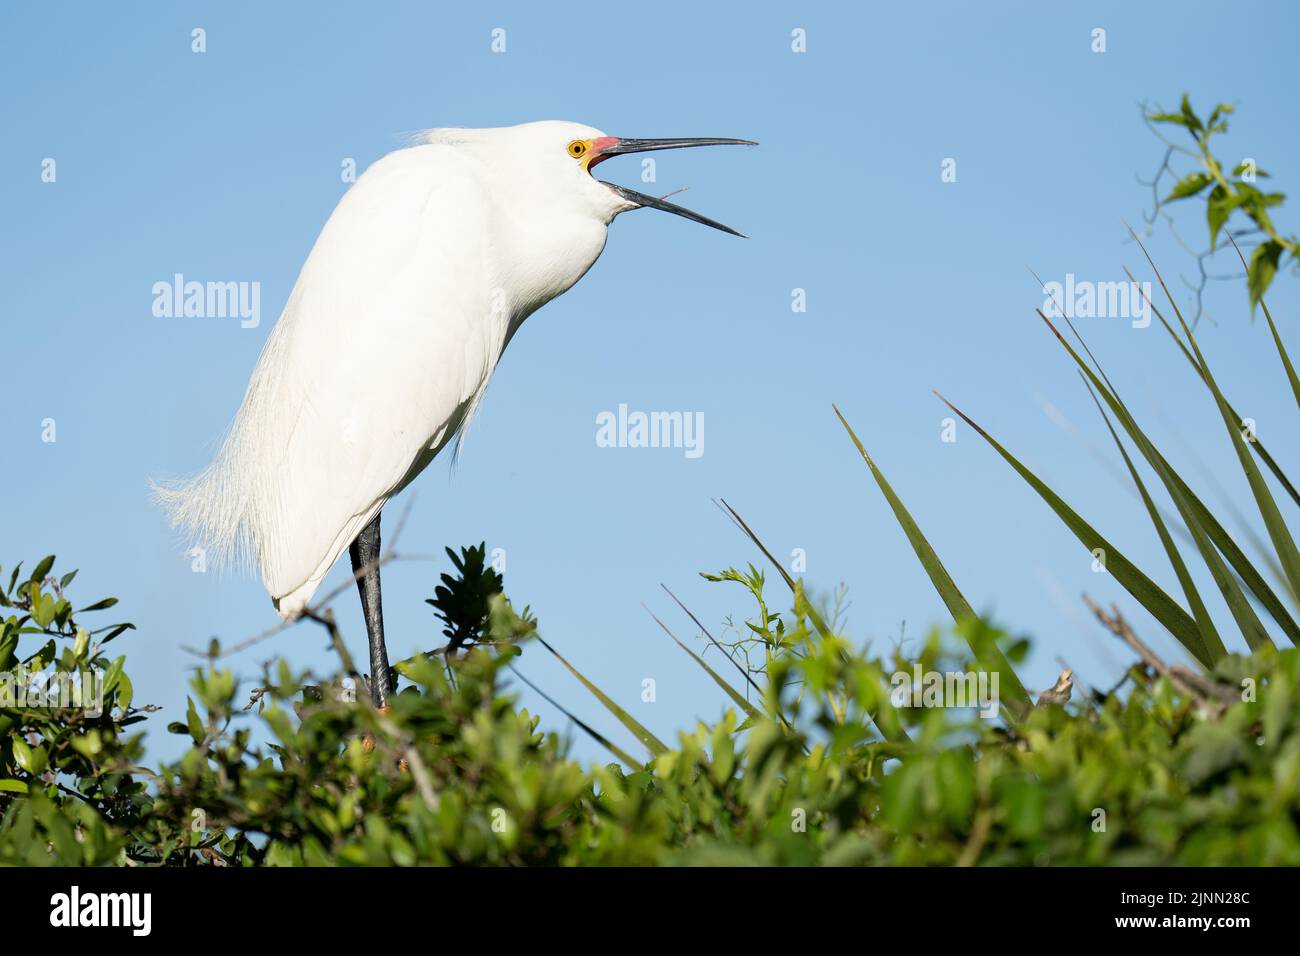 Snowy Egret Belting out a Call Stock Photo